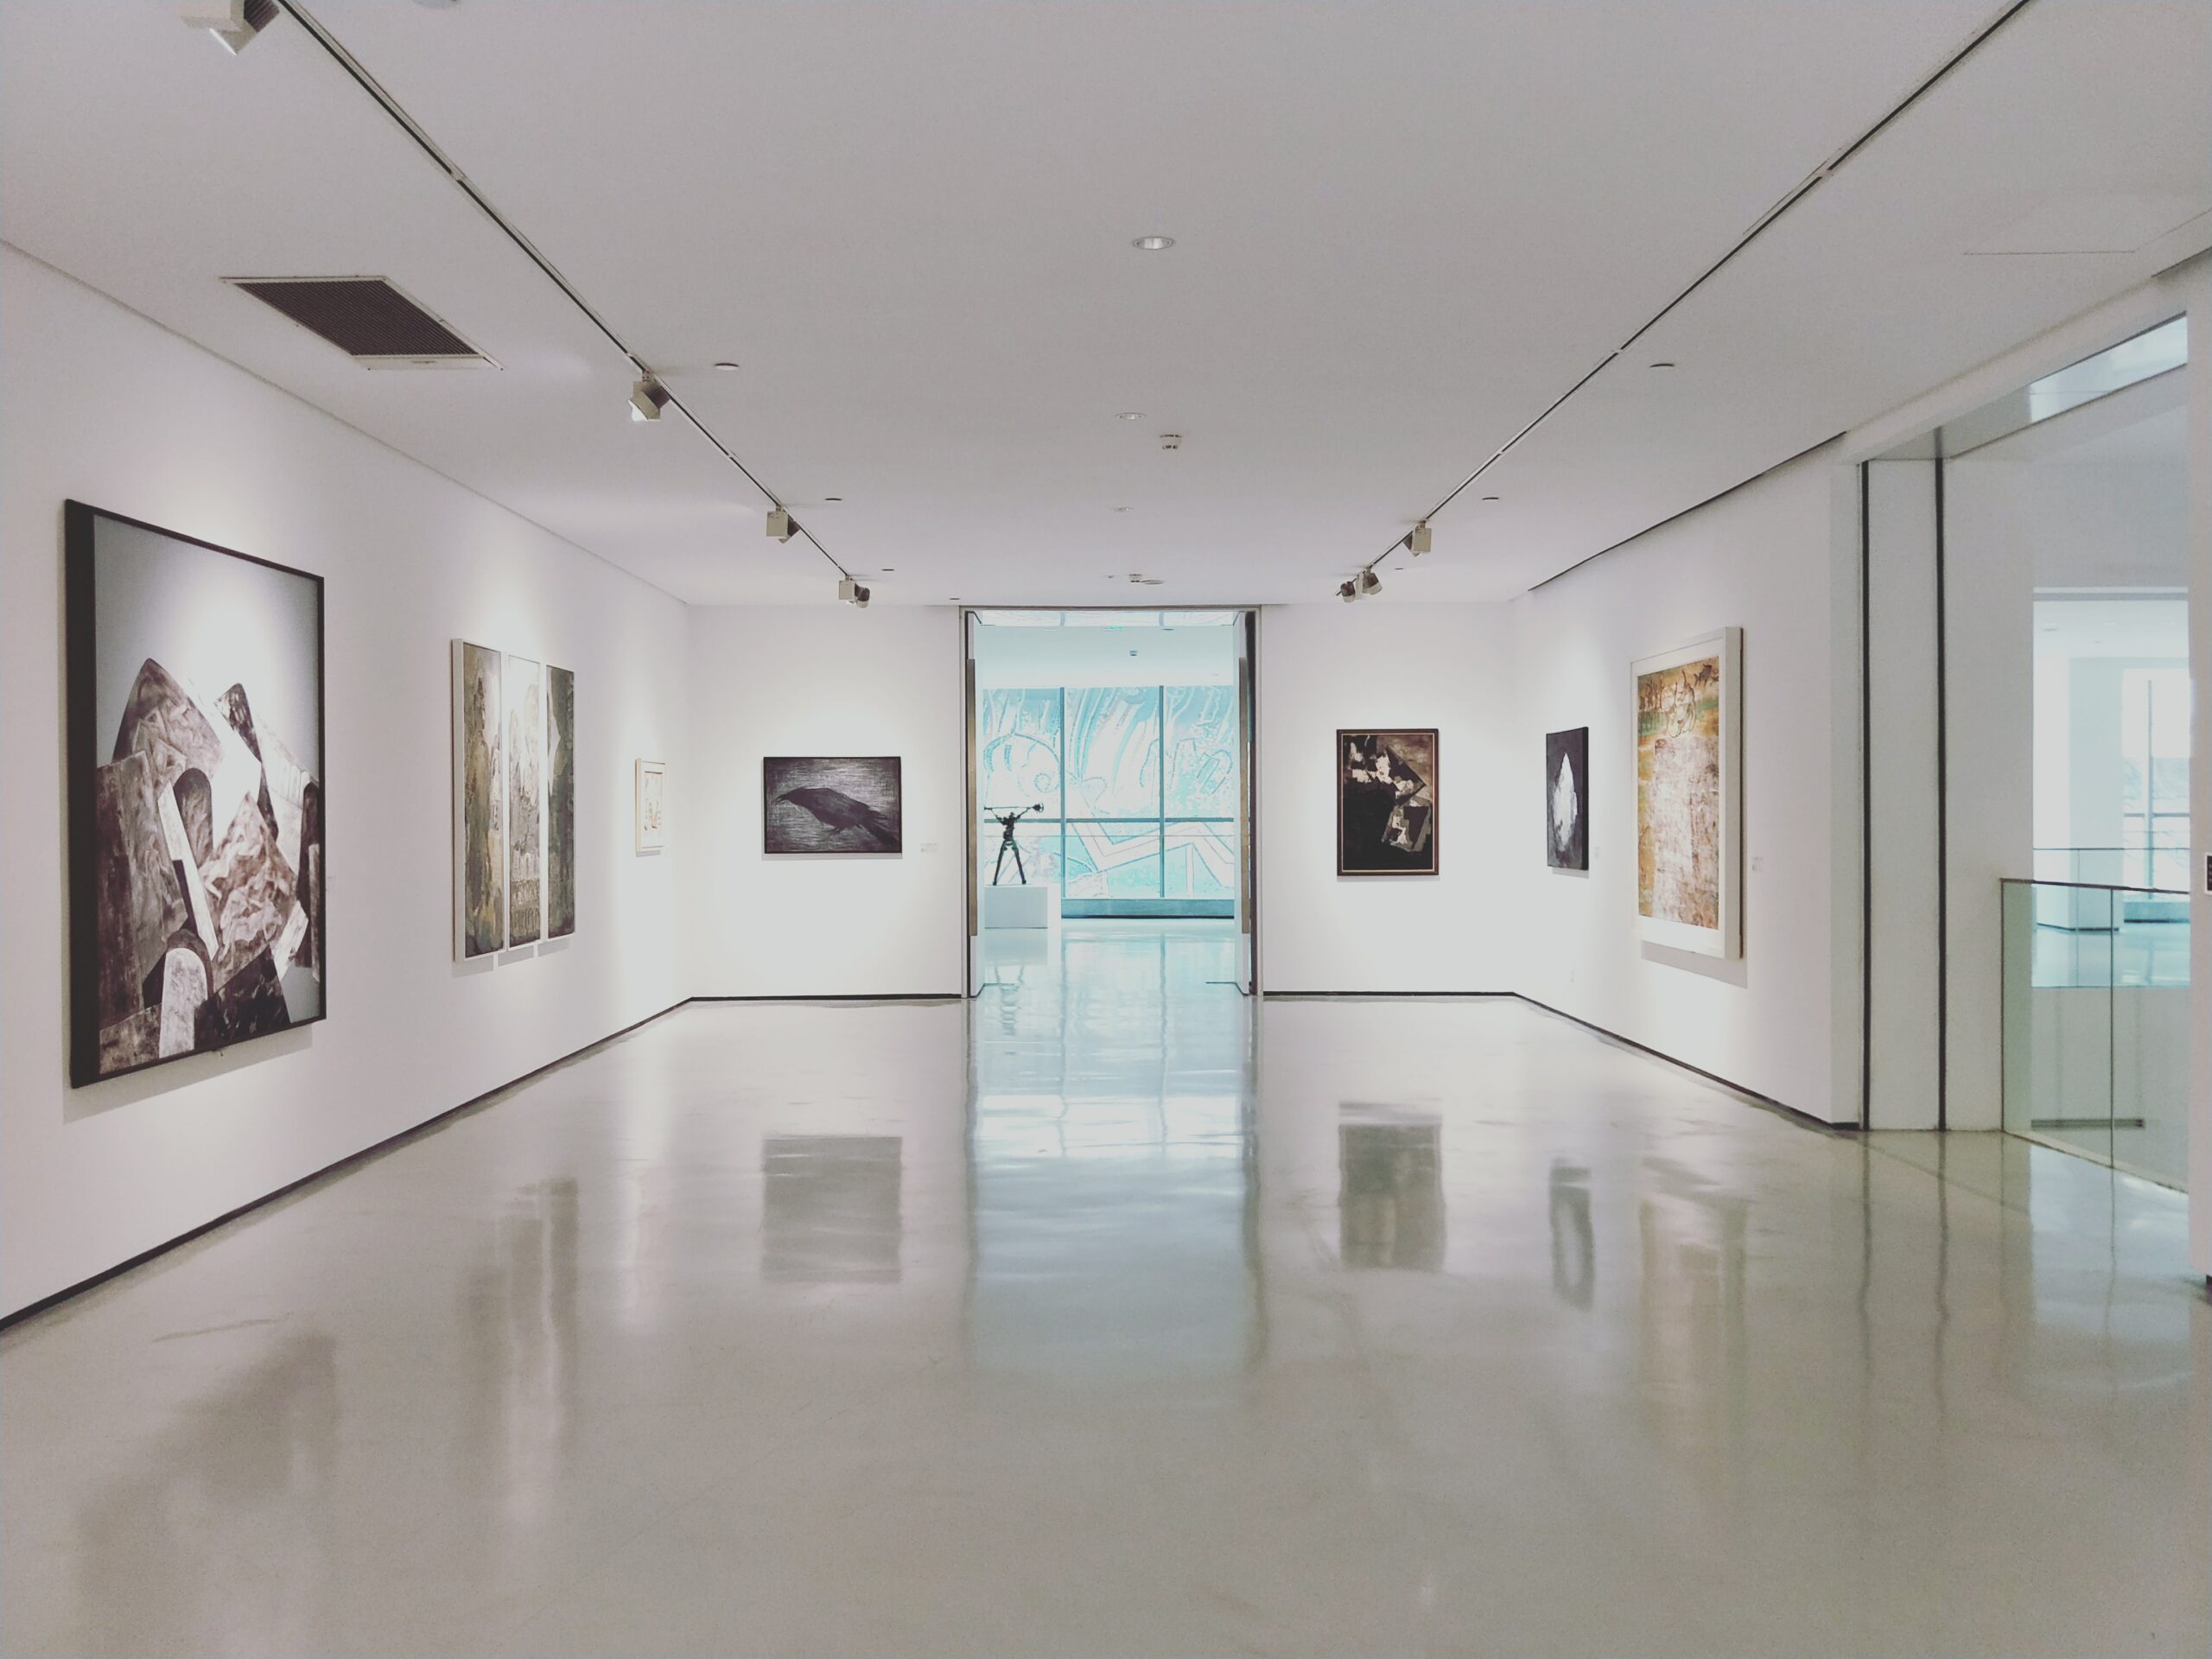 An empty gallery with white walls featuring large landscape paintings